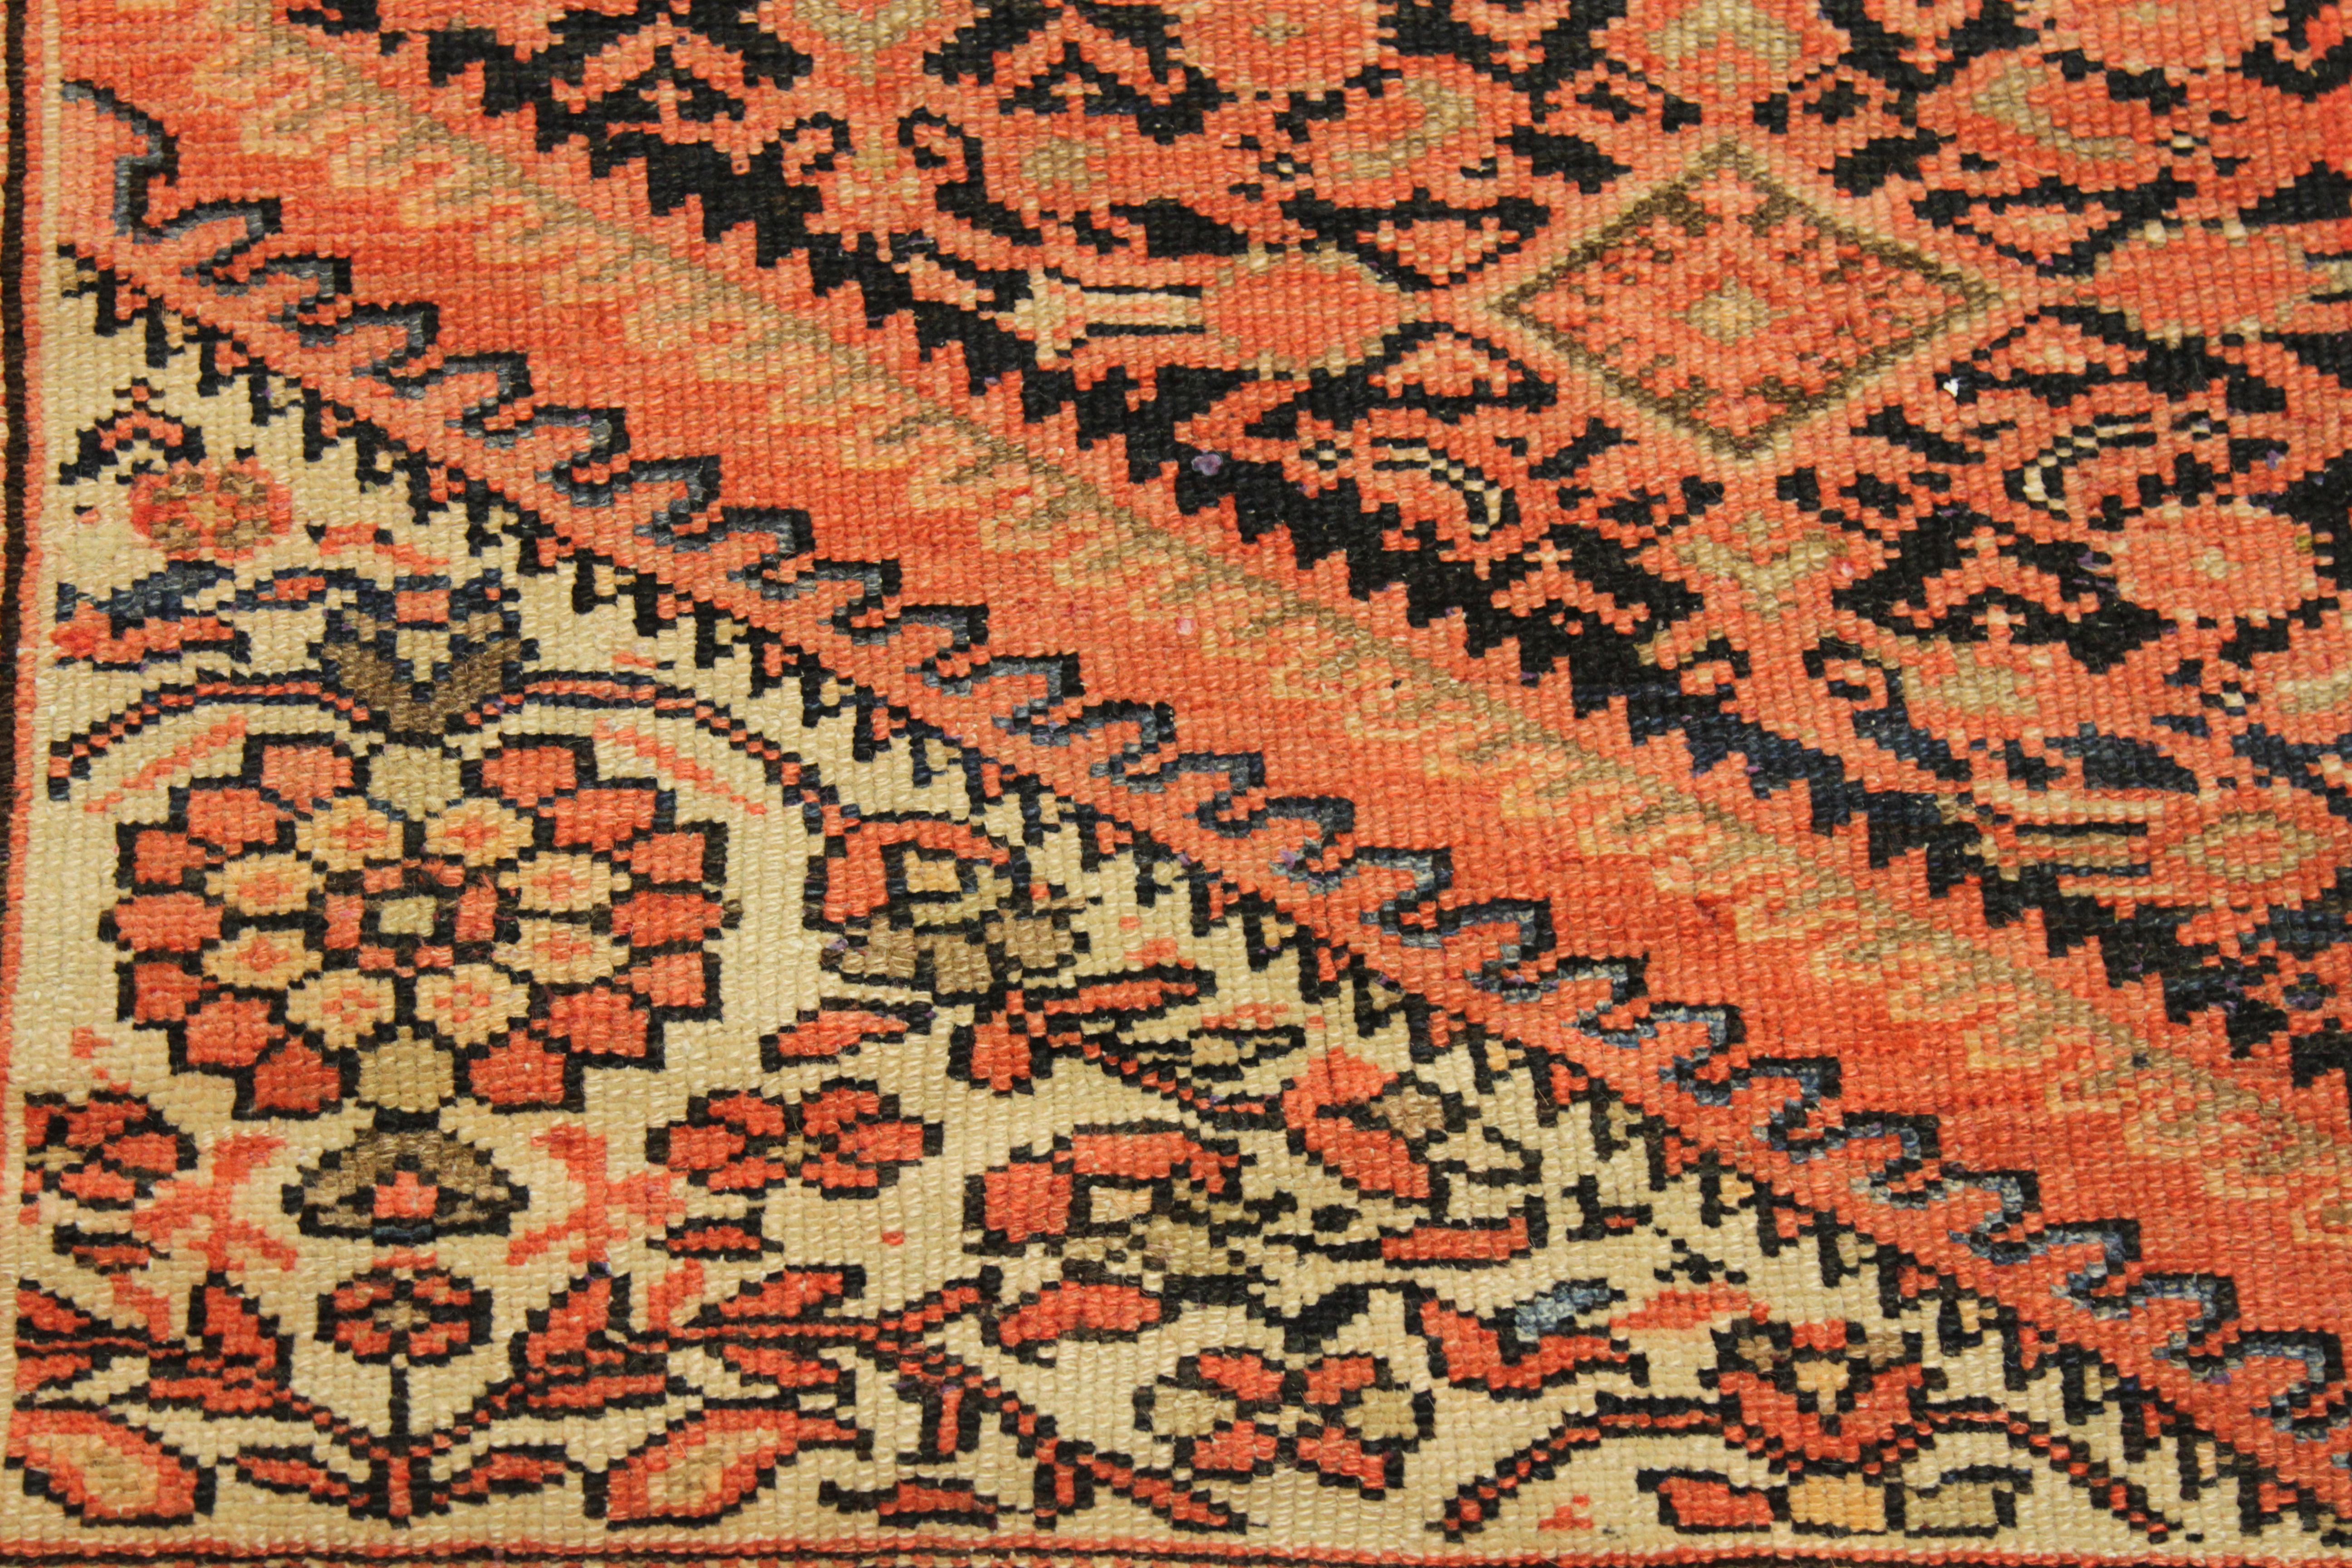 Antique Persian Rug Malayer Design with Orange and Black Details, circa 1930s For Sale 5